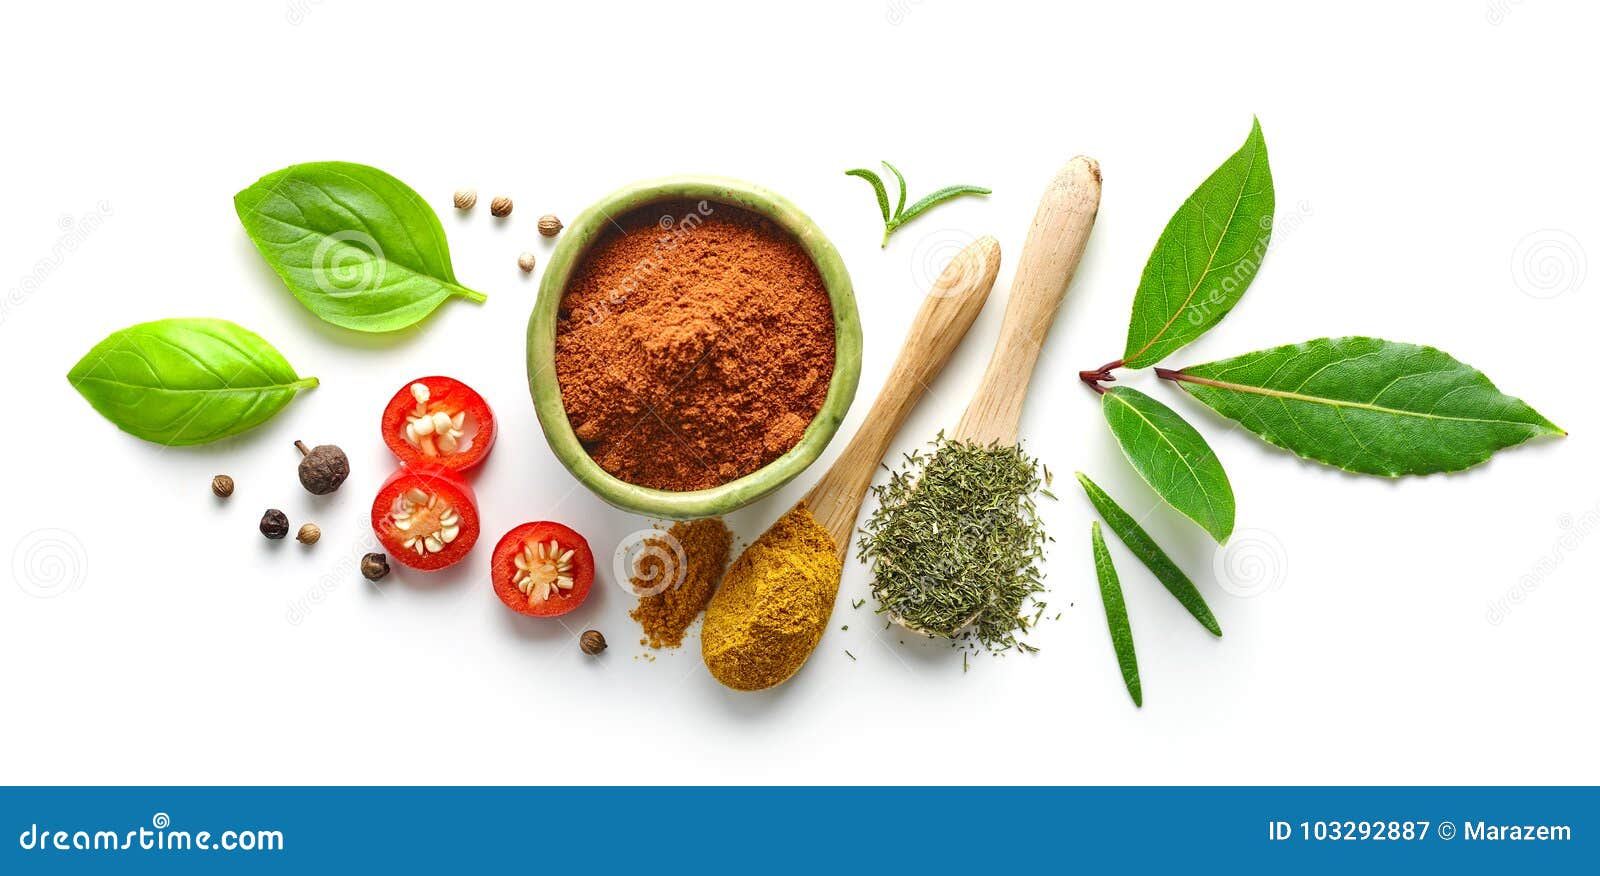 various spices  on white background